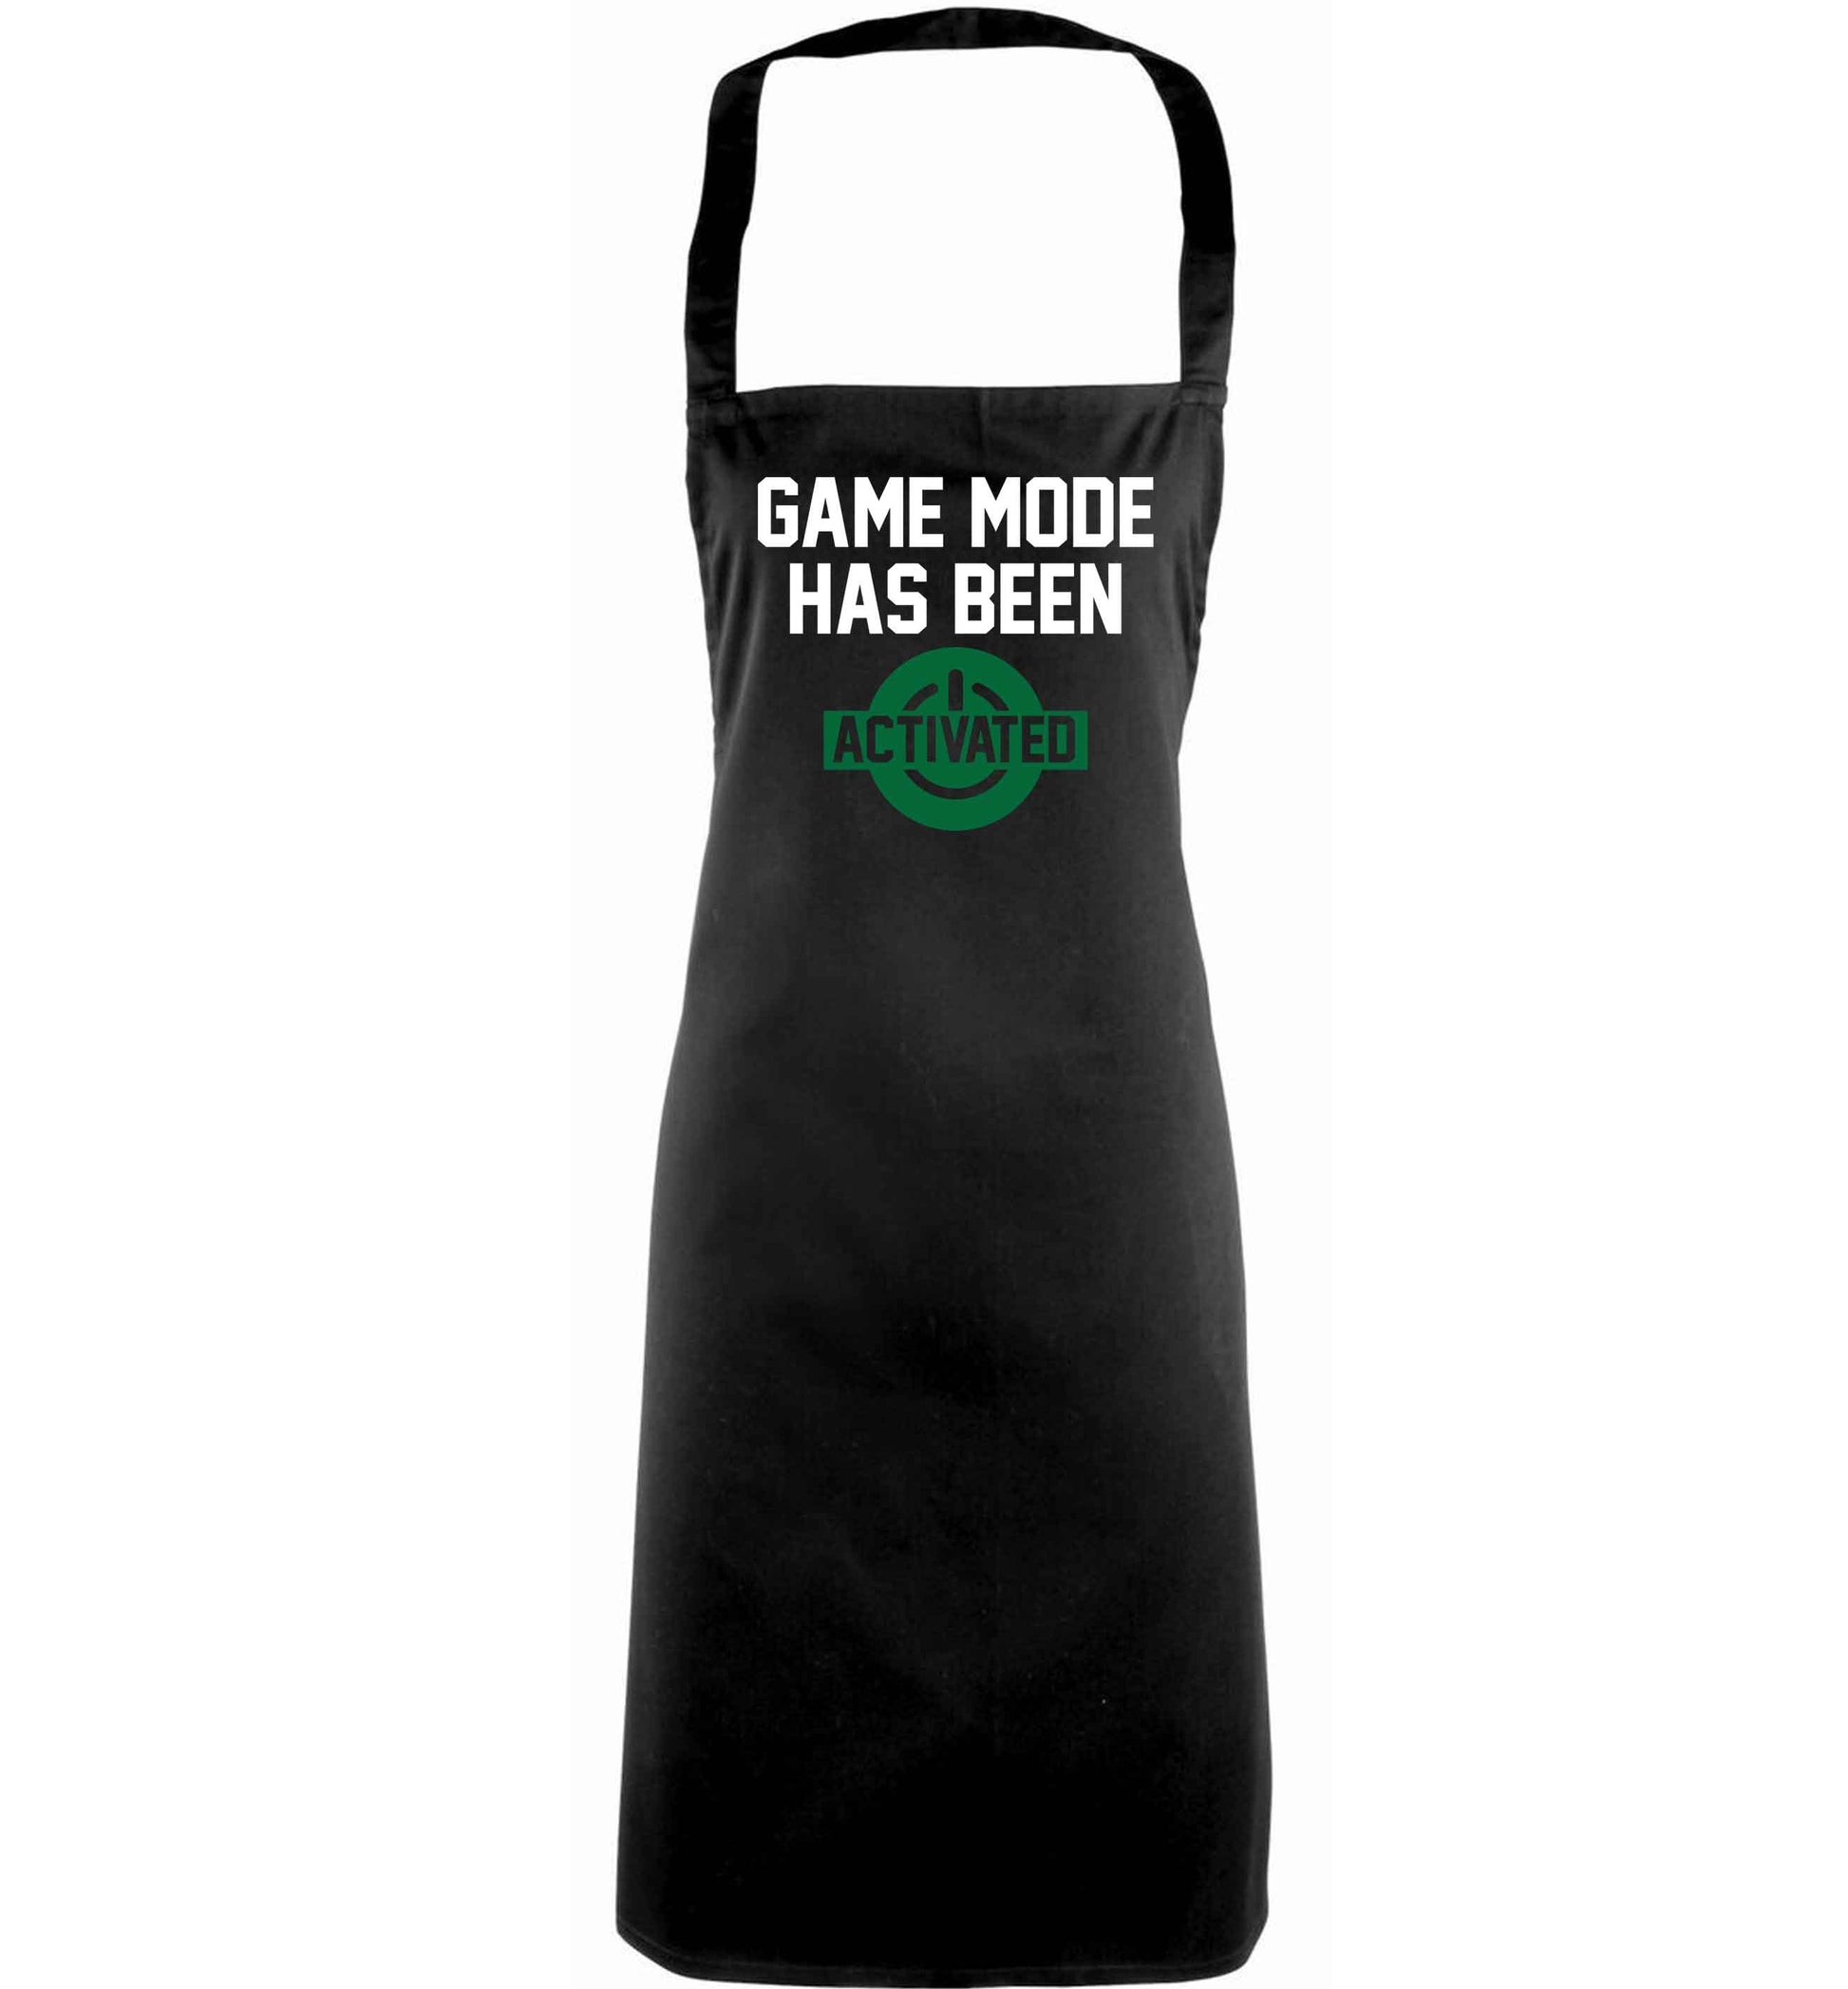 Game mode has been activated adults black apron